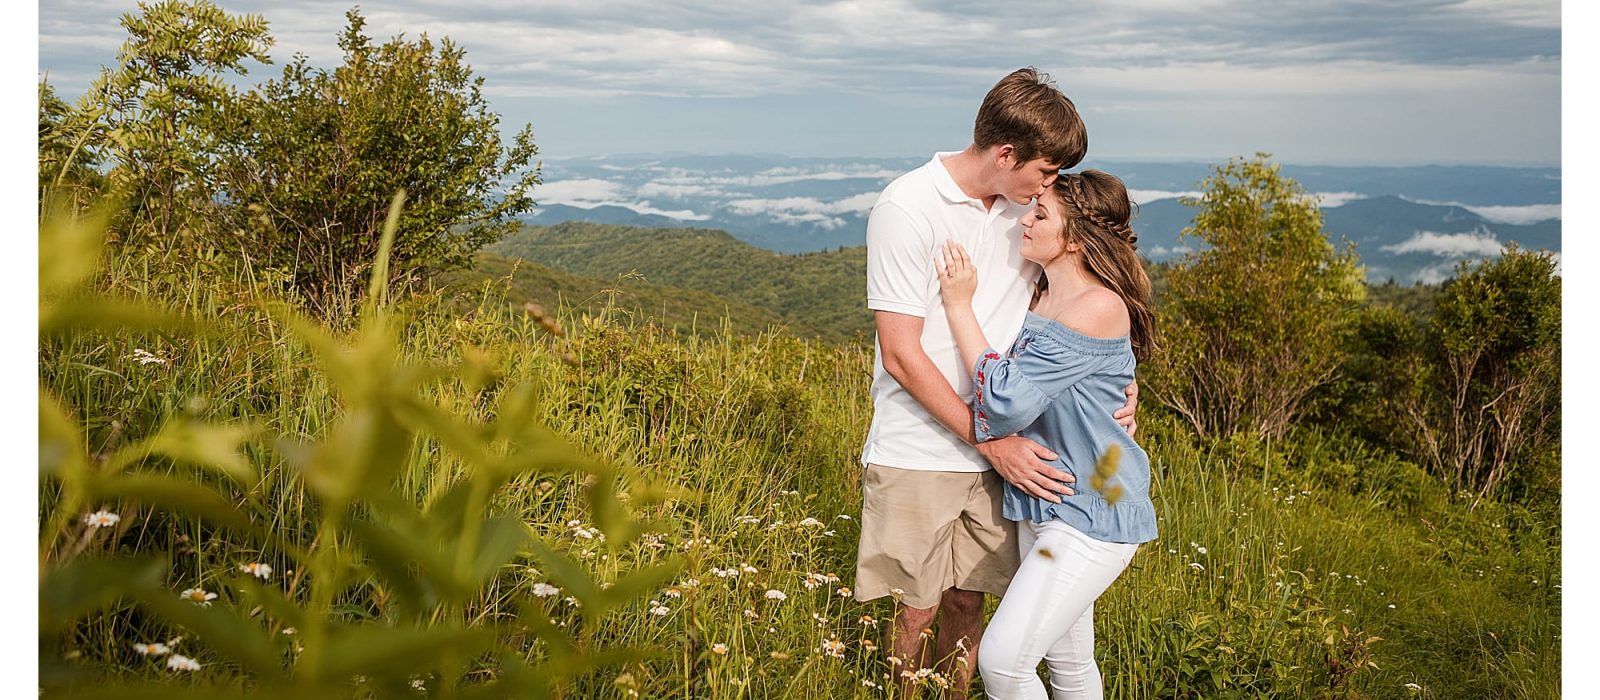 Young man kissing fiances forehead while standing in field with mountains in background